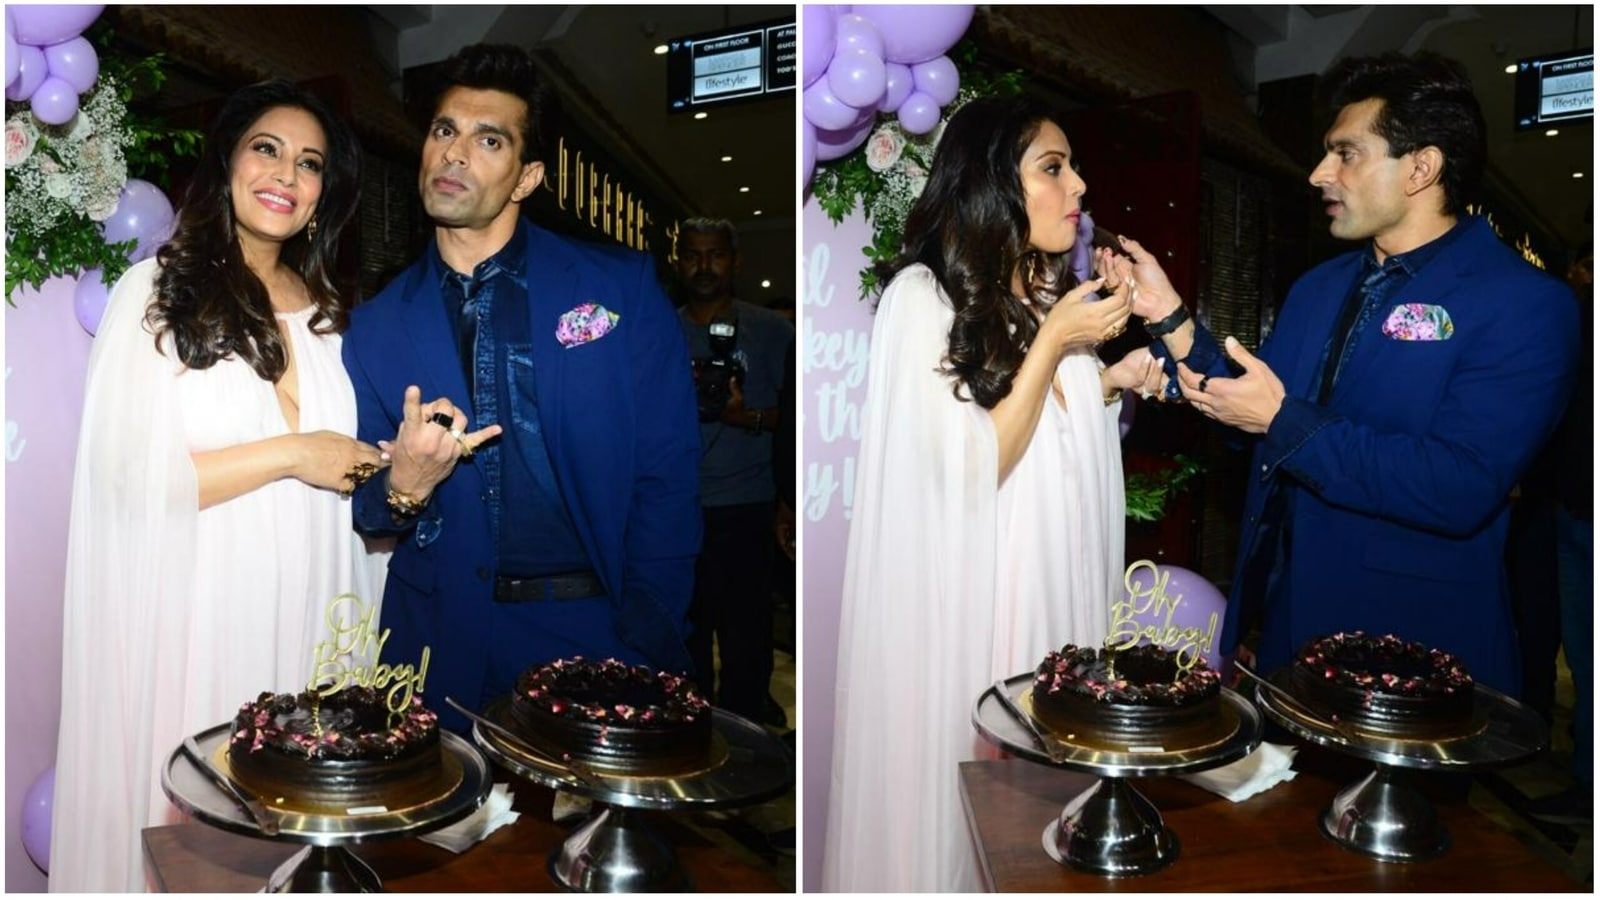 Bipasha Basu and Karan Singh Grover celebrate second baby shower, wish for ‘happy and healthy baby’. See pics